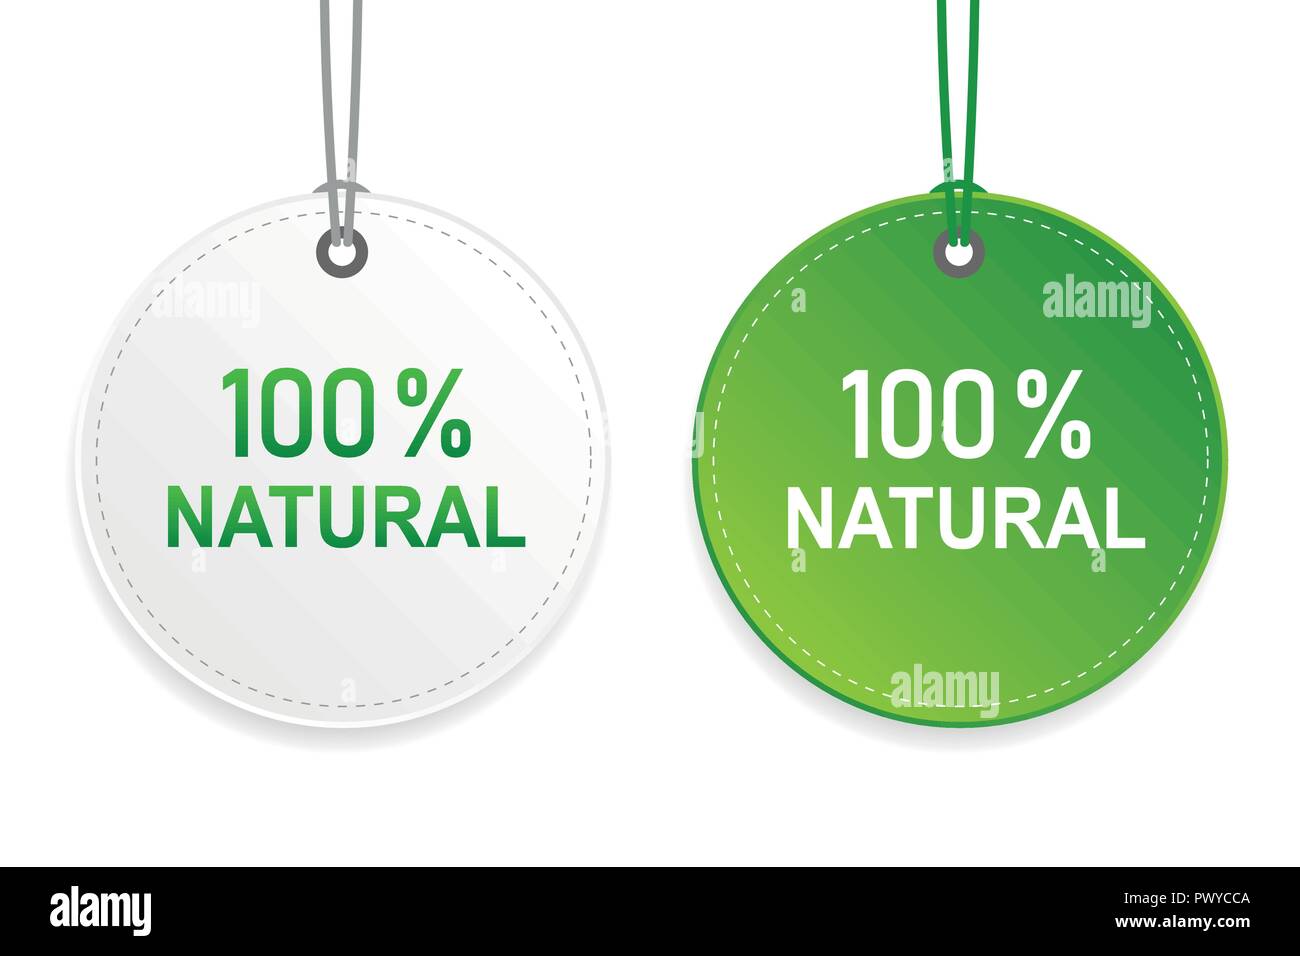 100 percent natural cachet green and white label vector illustration EPS10 Stock Vector